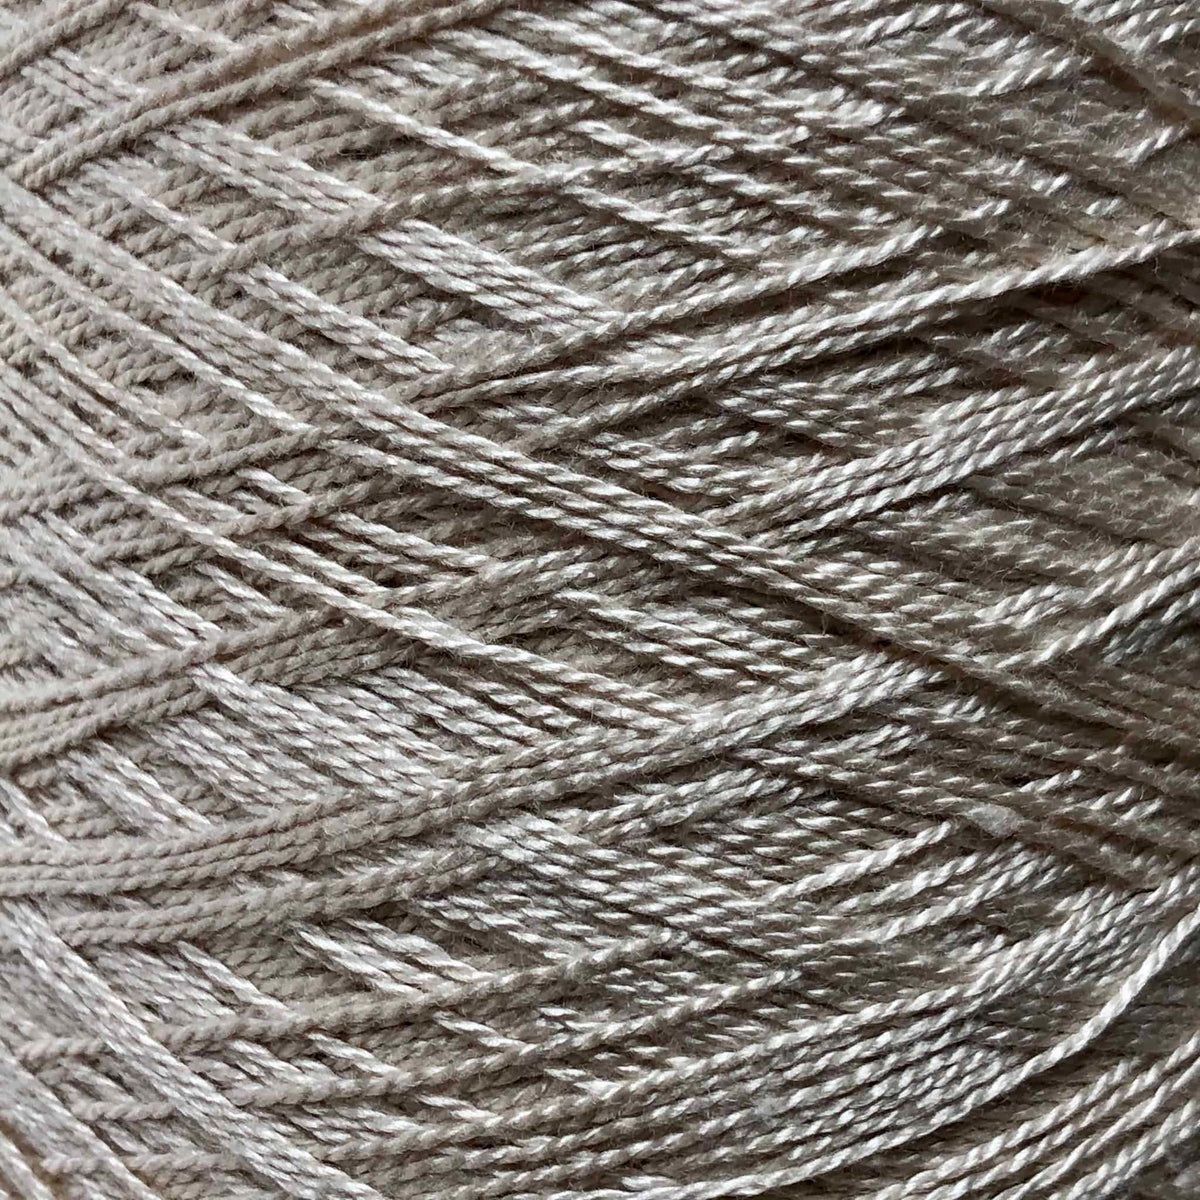 Thick 100% Lavender Yarn close up